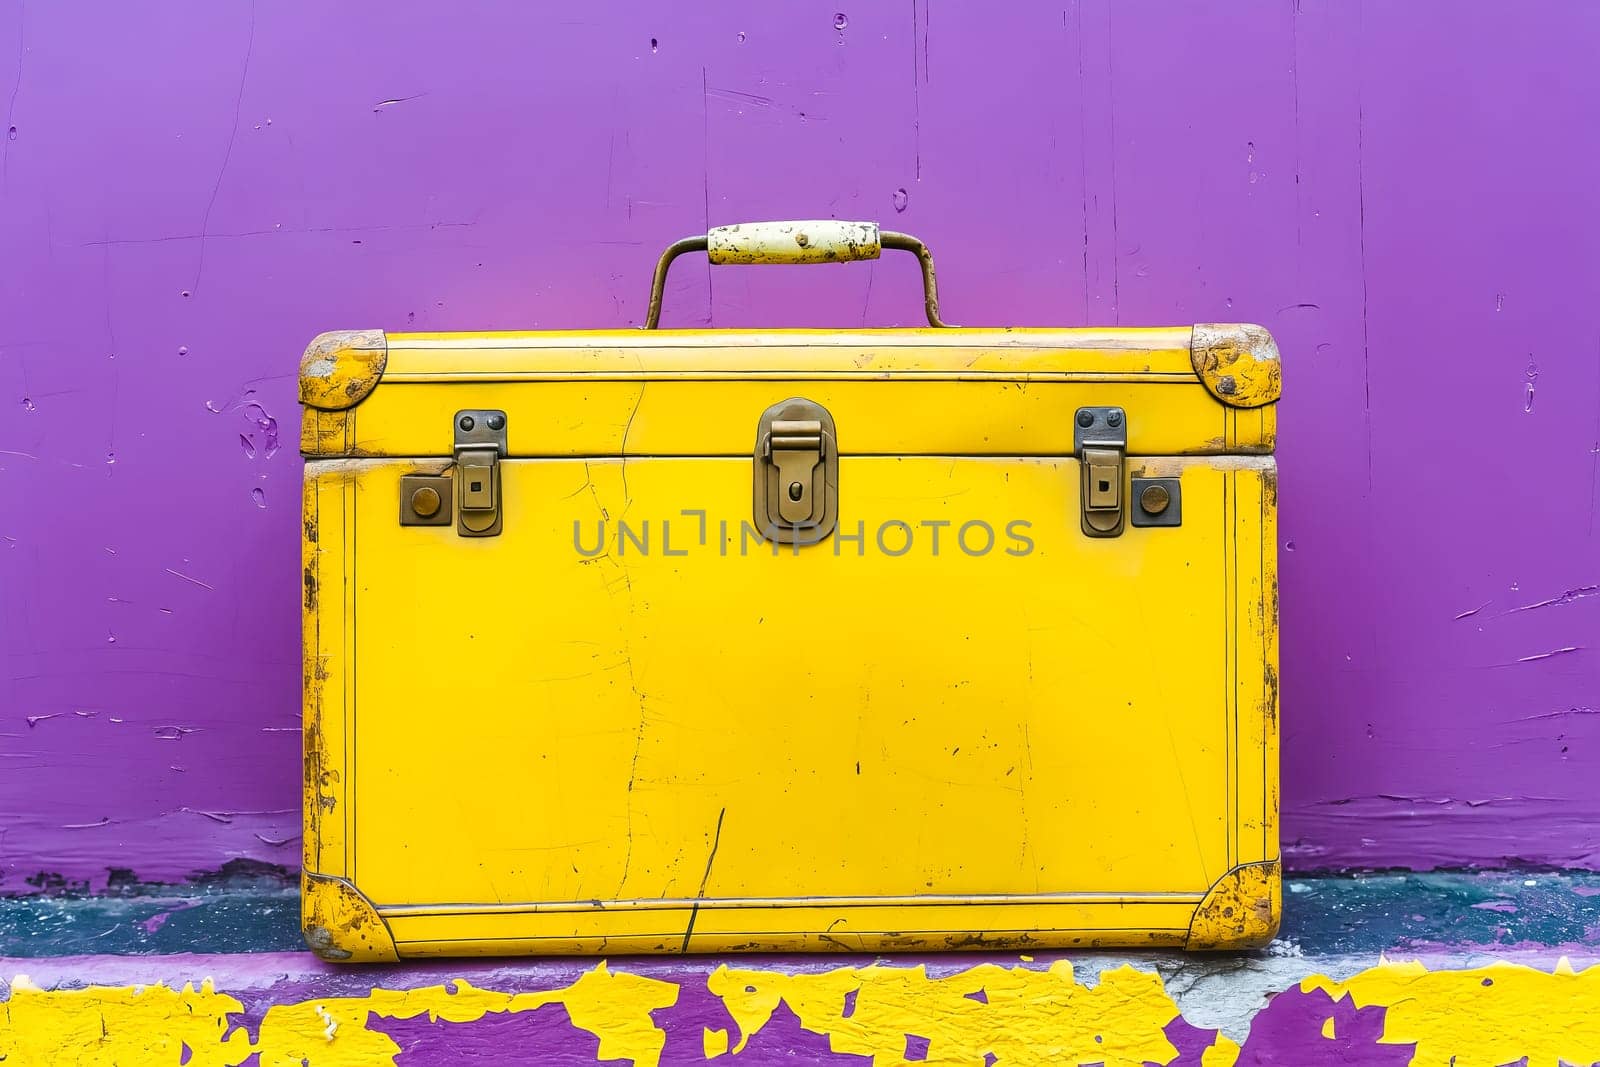 A yellow suitcase is sitting on a purple wall. The suitcase is old and has a worn appearance. The purple wall adds a sense of color and contrast to the scene. The image conveys a feeling of nostalgia. Generative AI